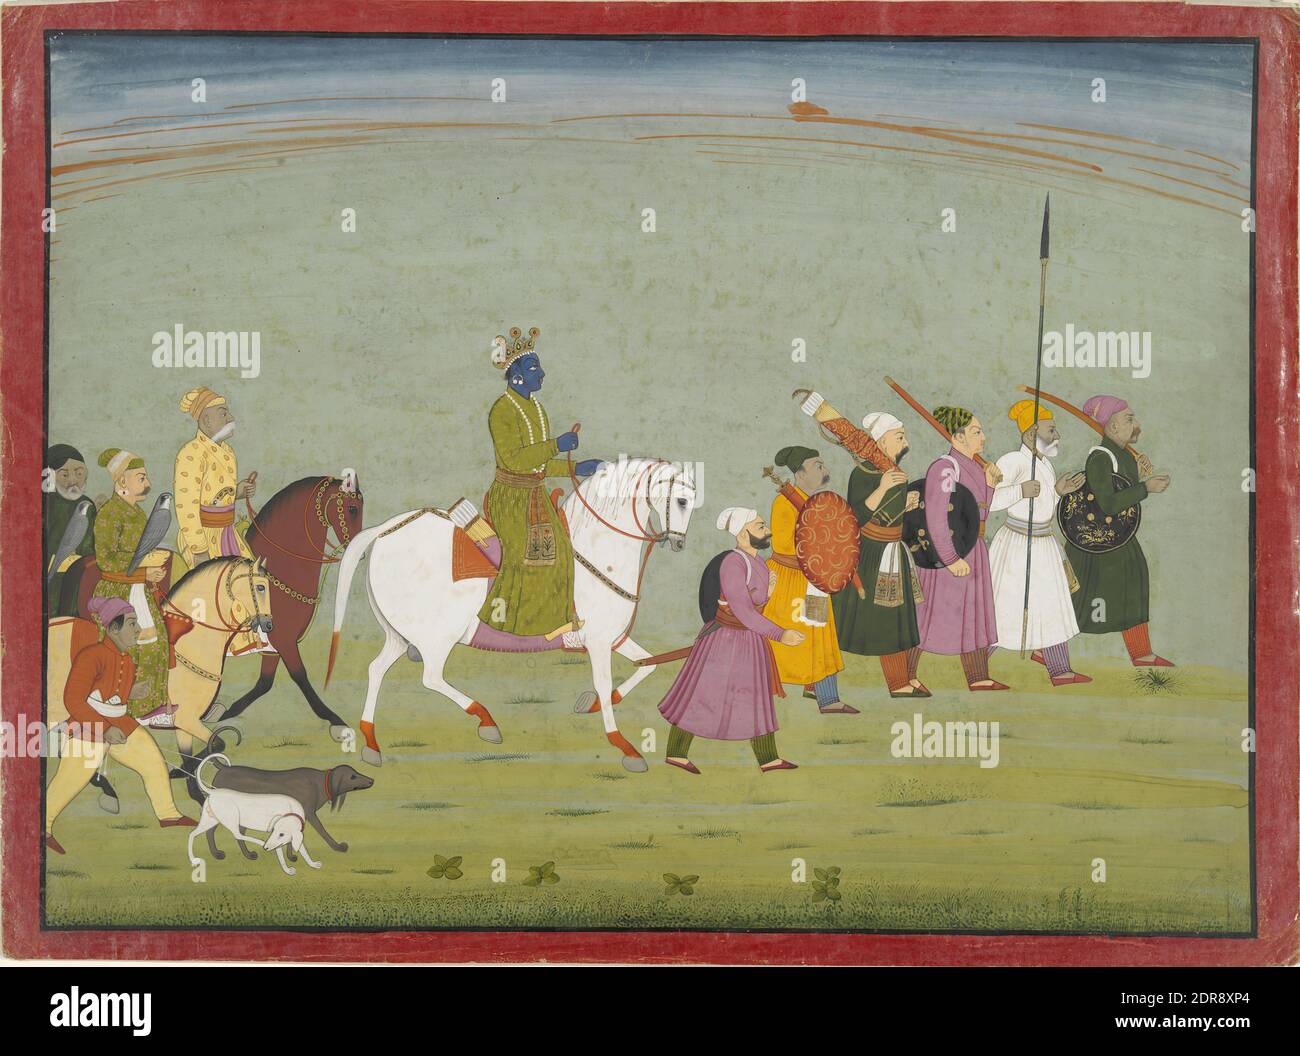 Illustration from a Bhagavata Purana Series, Book 10: Krishna Leads the Townspeople, ca. 1760–65, Opaque watercolor and gold on paper, without mounting: 10 15/16 × 14 5/8 in. (27.8 × 37.2 cm), India, Indian, India, Mughal dynasty (1526–1857), Paintings Stock Photo